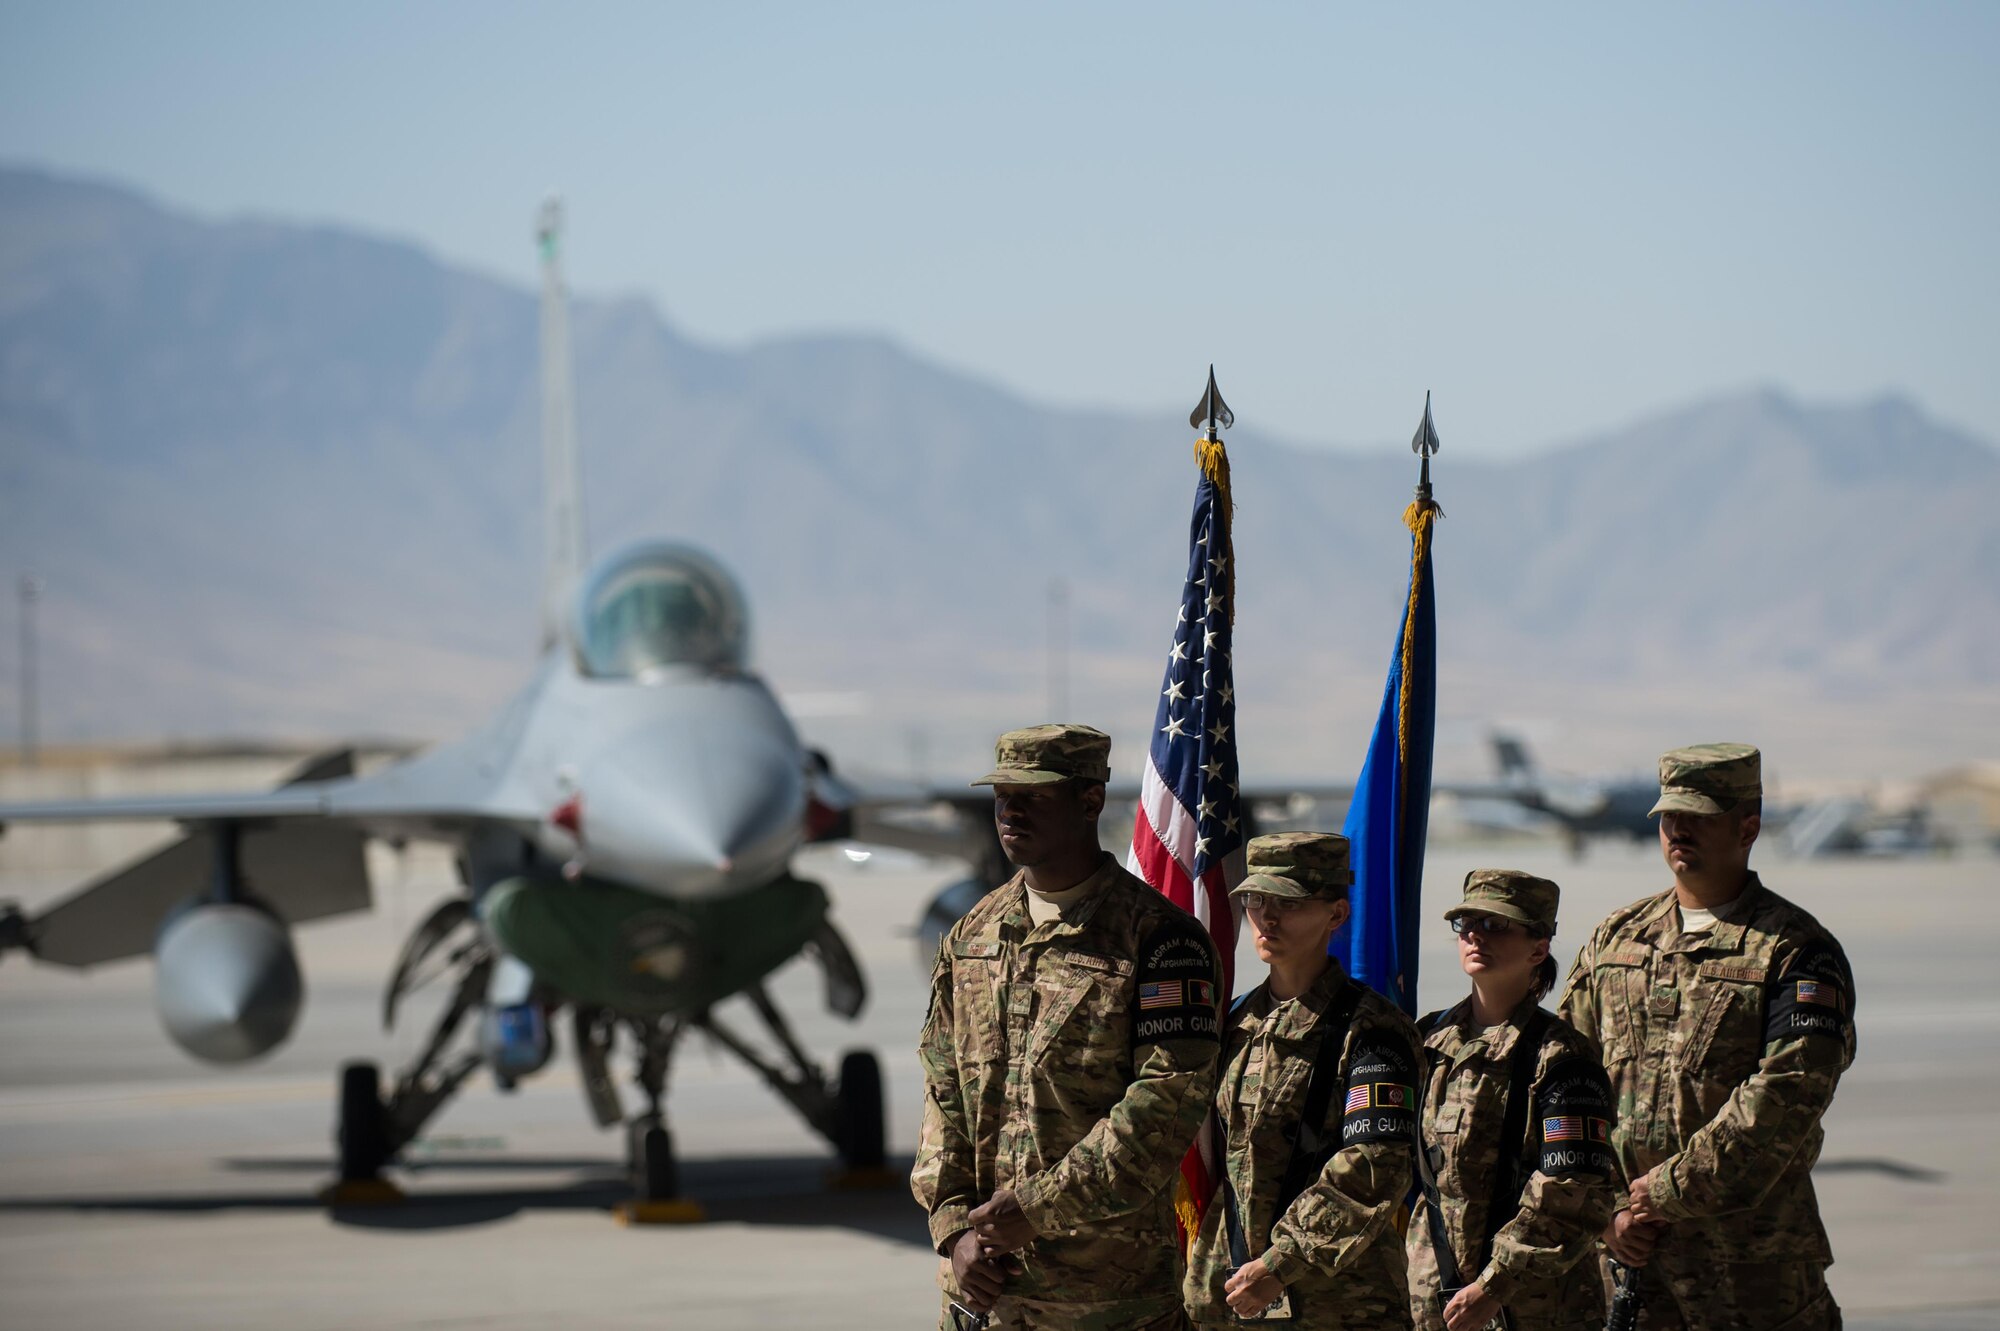 U.S. Airmen with the Bagram Airfield Honor Guard stand ready to present the colors during the 455th Air Expeditionary Wing change of command ceremony at Bagram Airfield, Afghanistan, July 1, 2015. During the ceremony Kelly relinquished command of the 455th AEW to Brig. Gen. Dave Julazadeh.  (U.S. Air Force photo by Tech. Sgt. Joseph Swafford/Released)